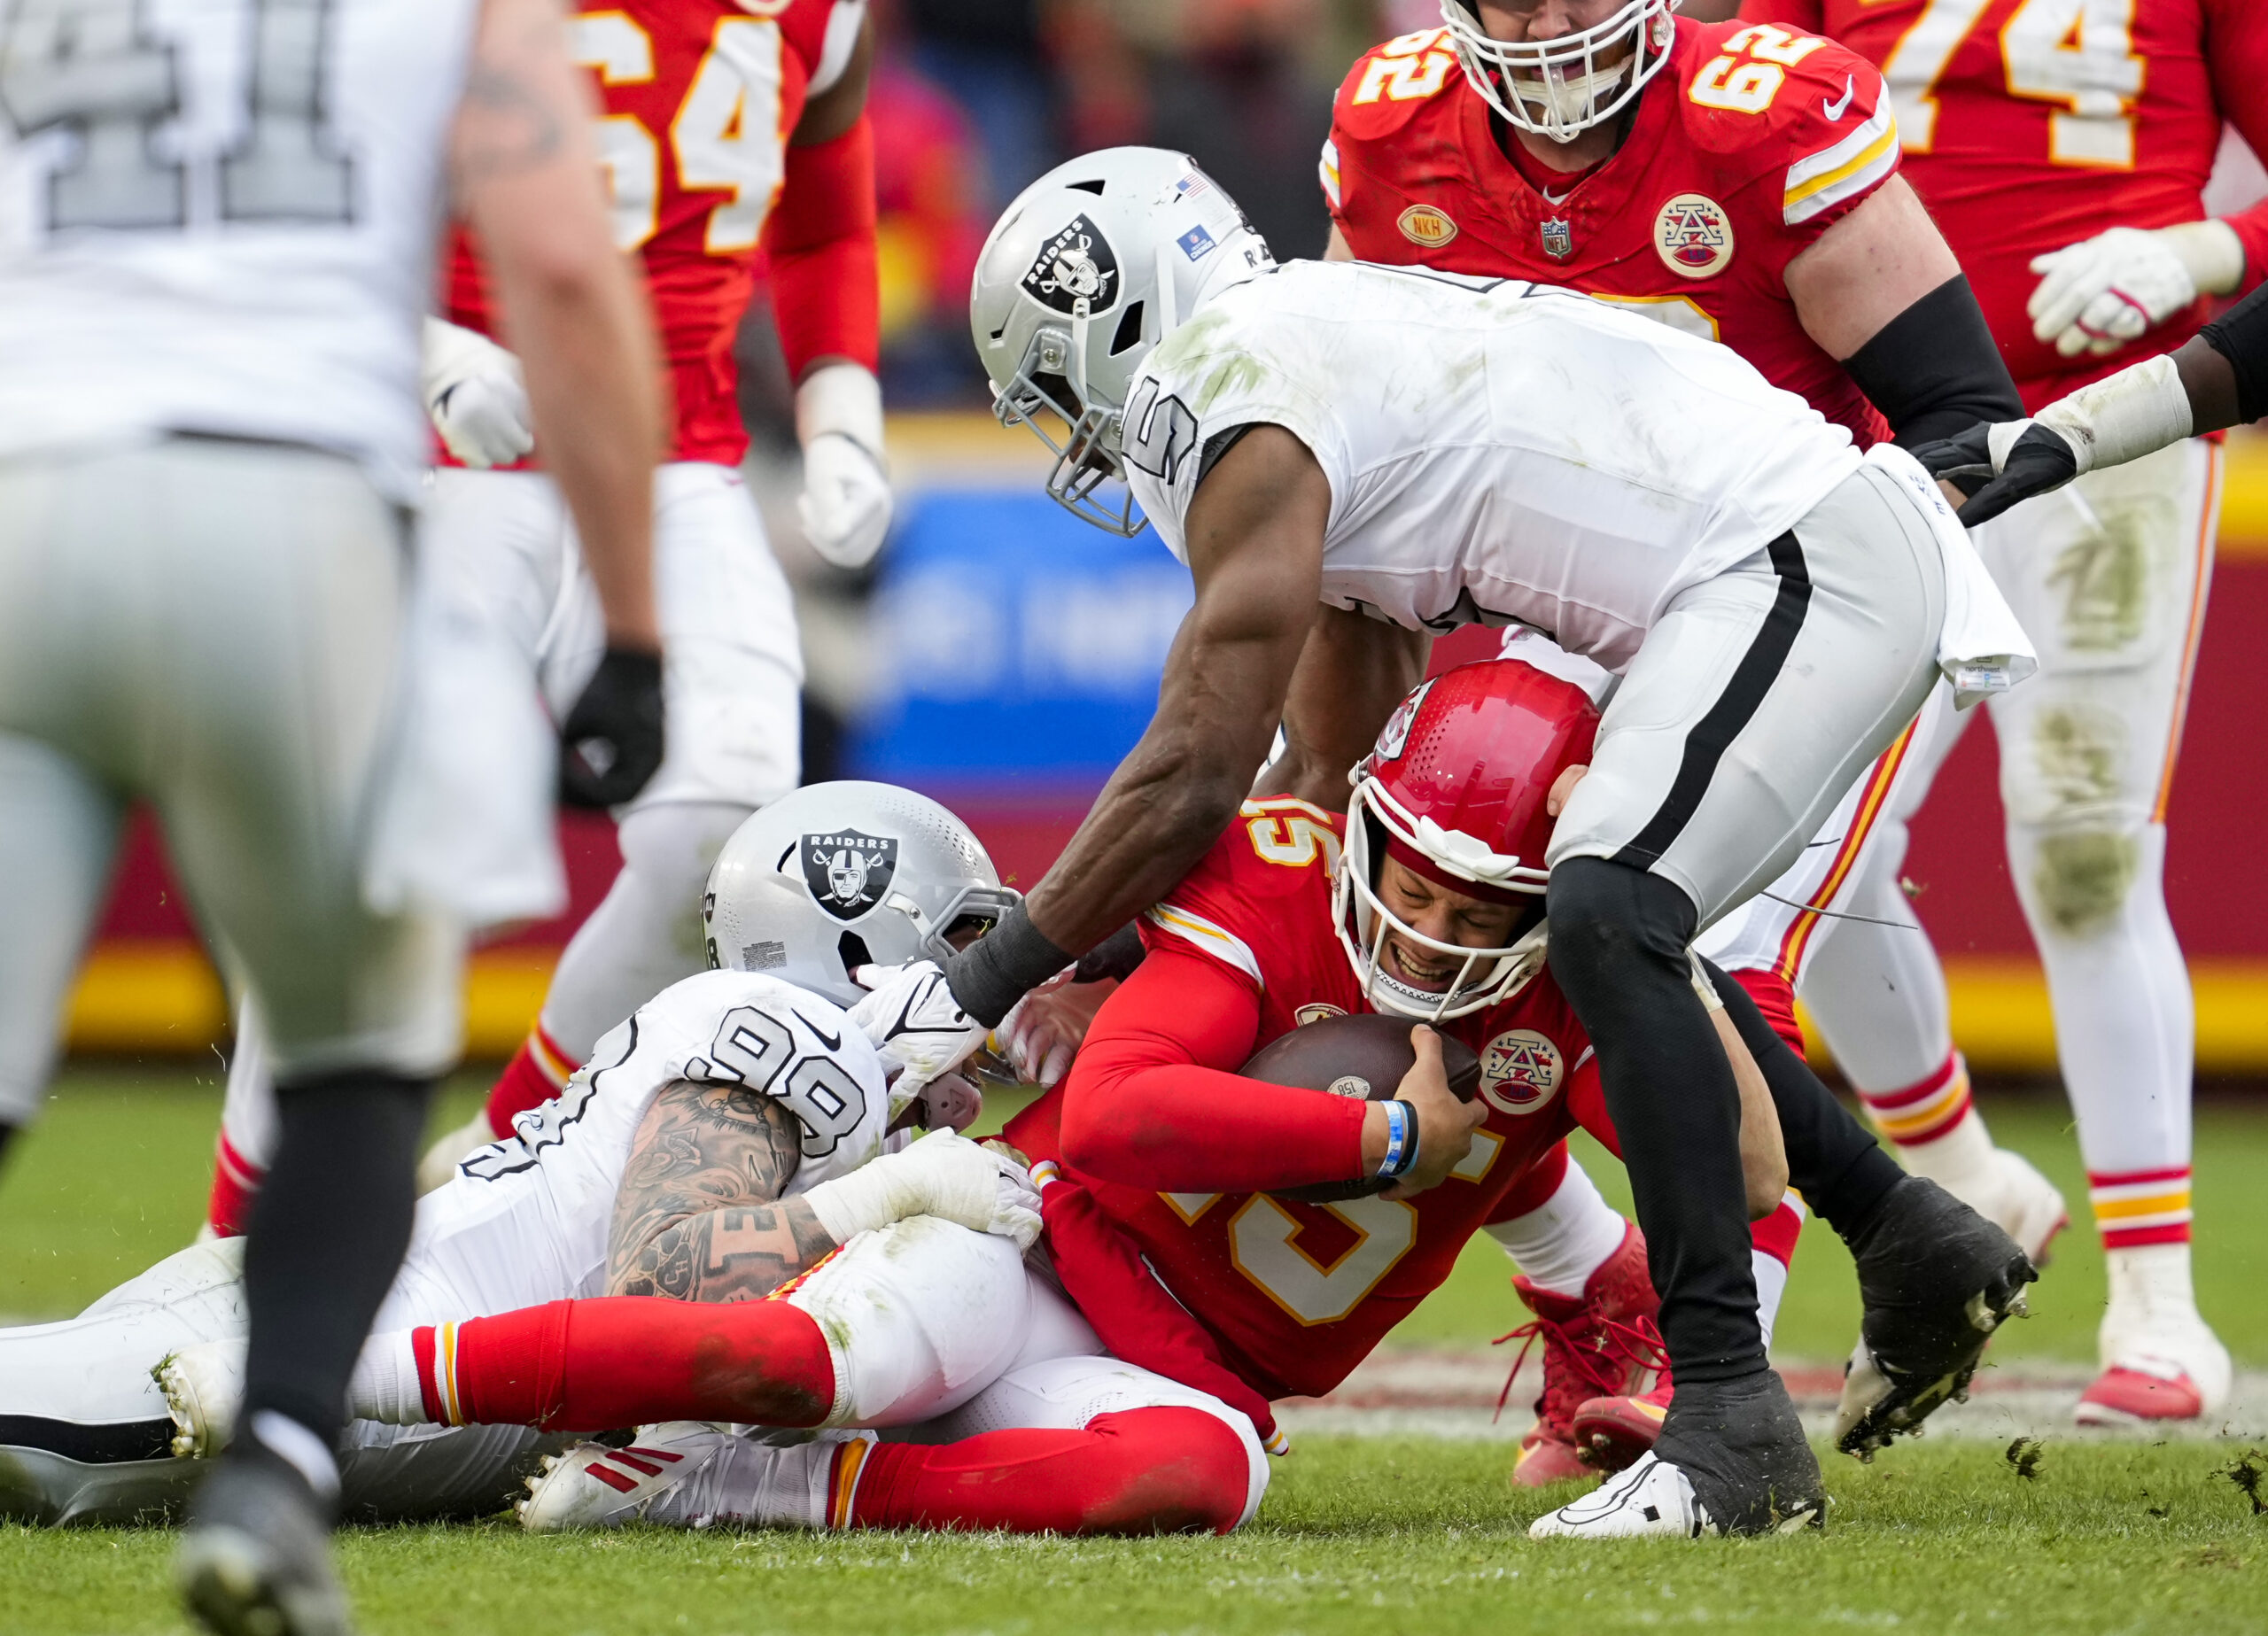 Patrick Mahomes is tackled by two Raiders players